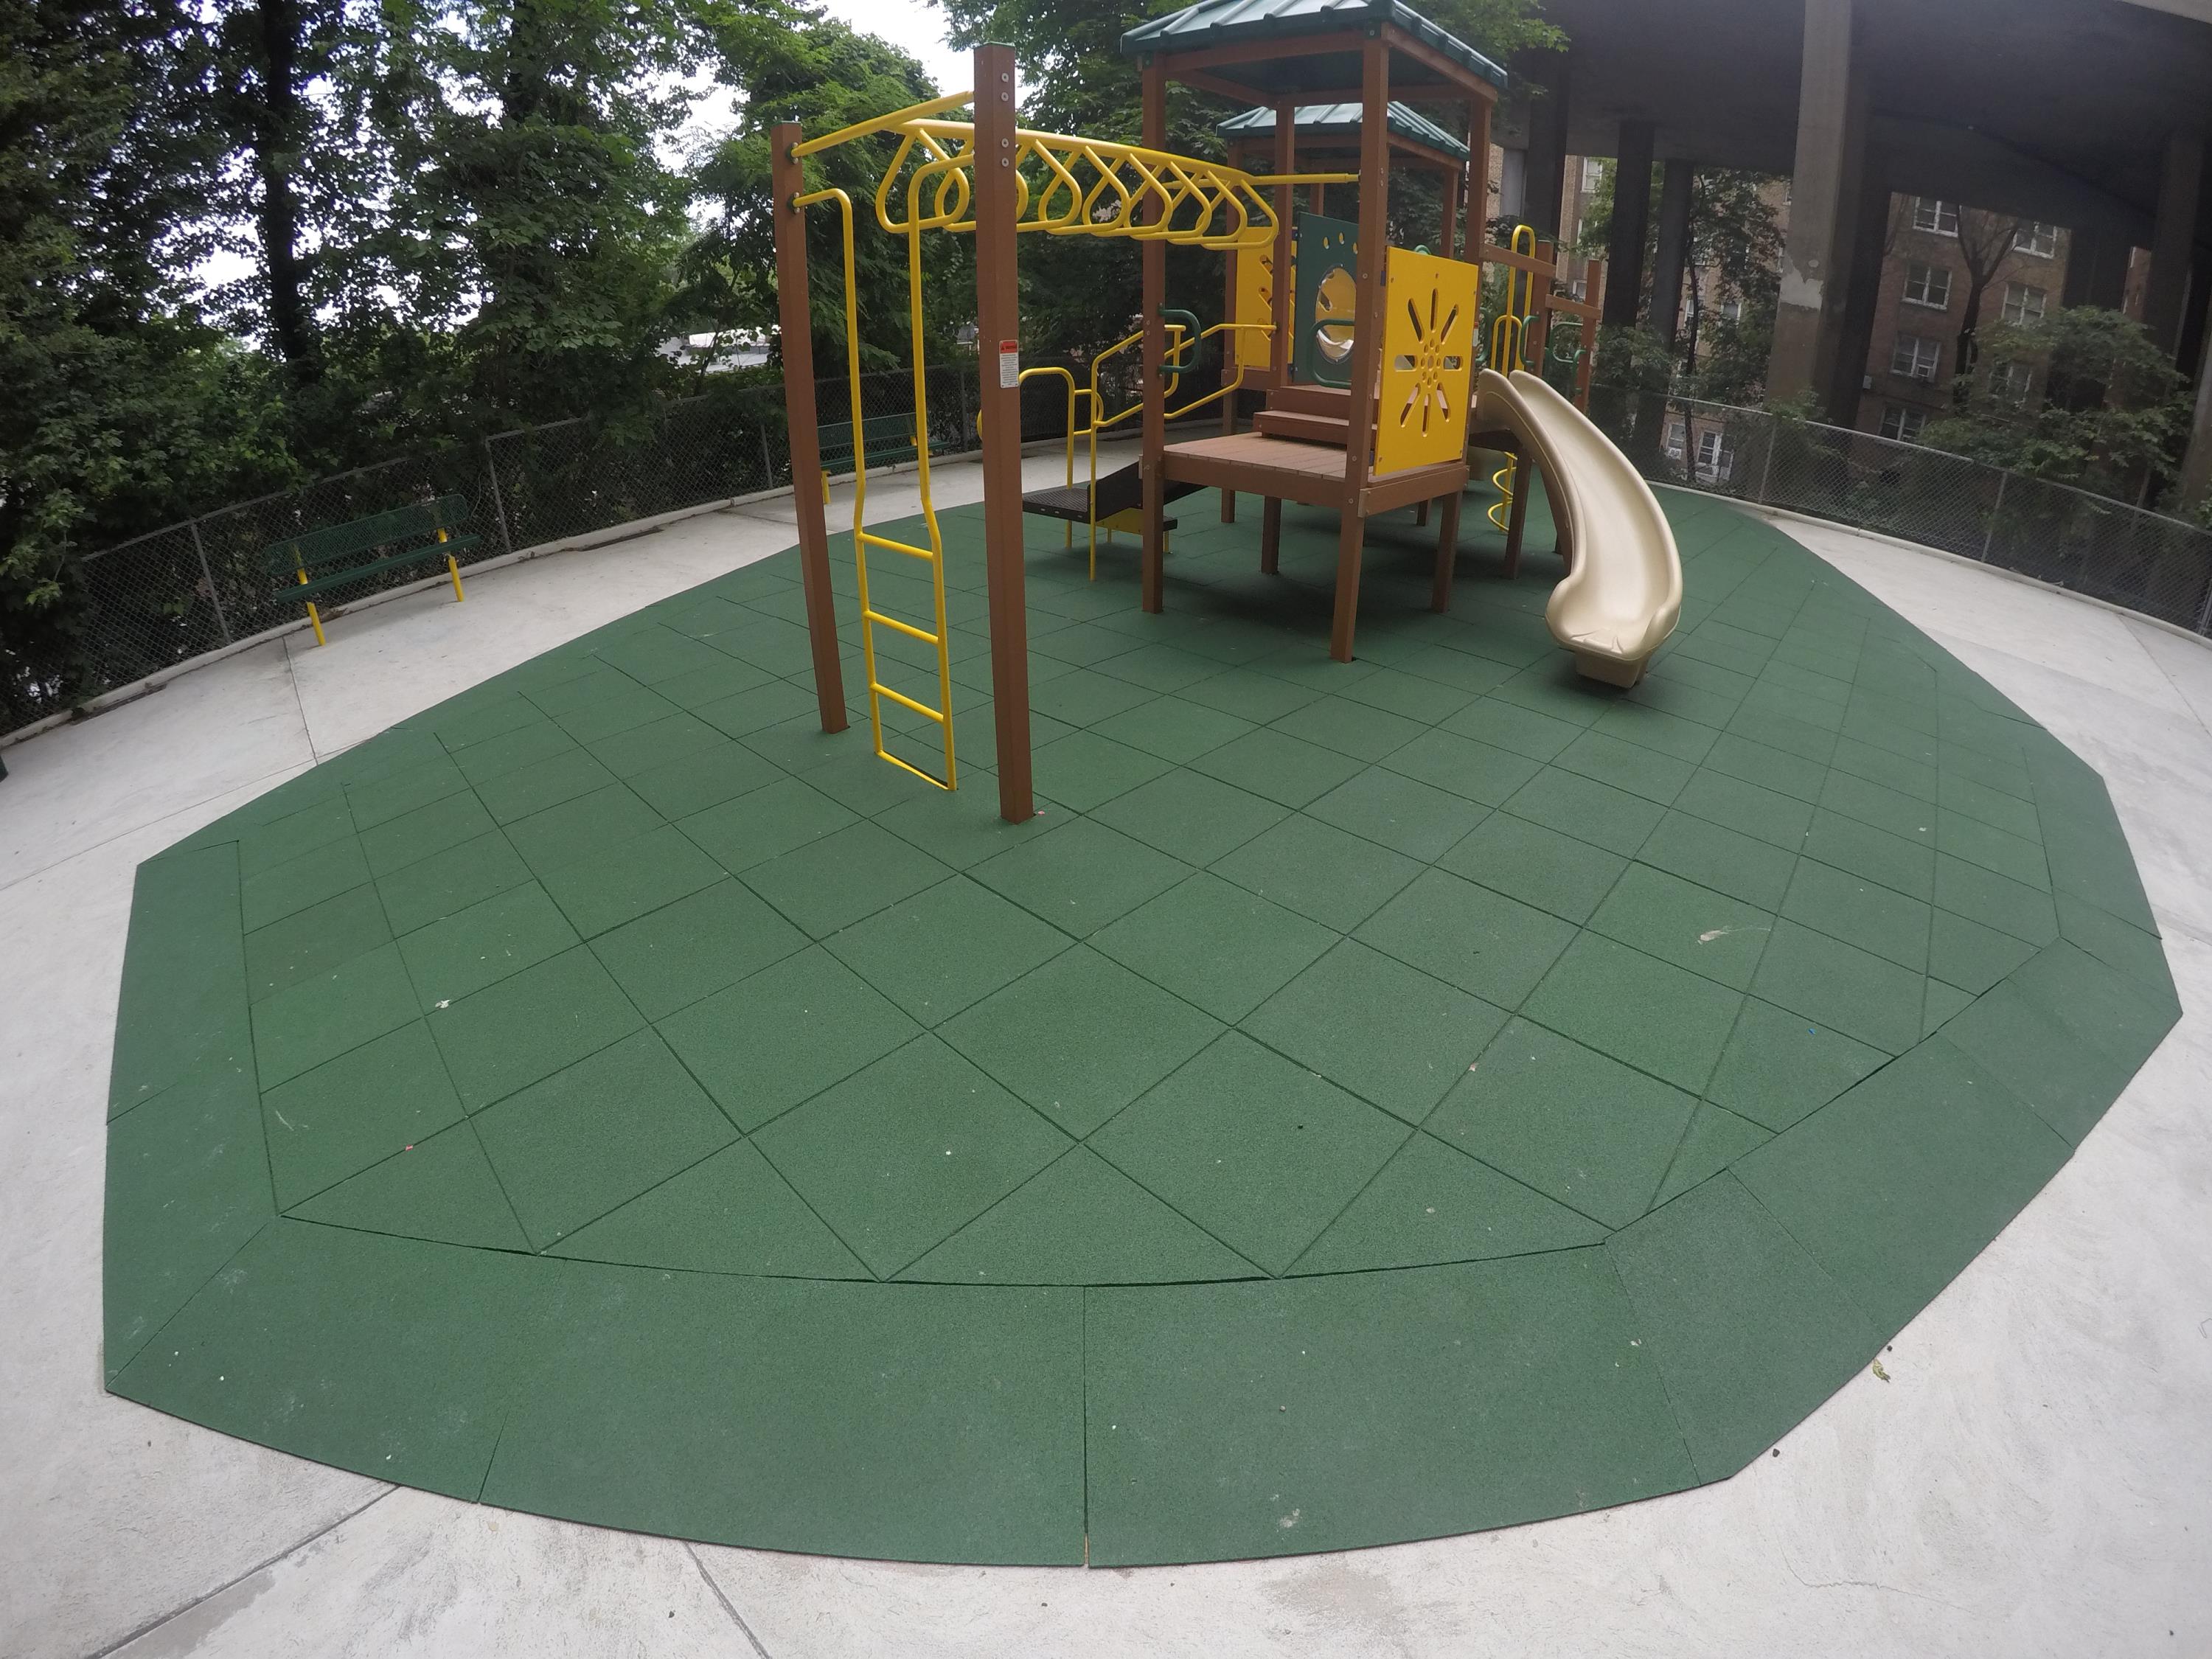 UNITY - Transitional Ramp Installation on a complicated project